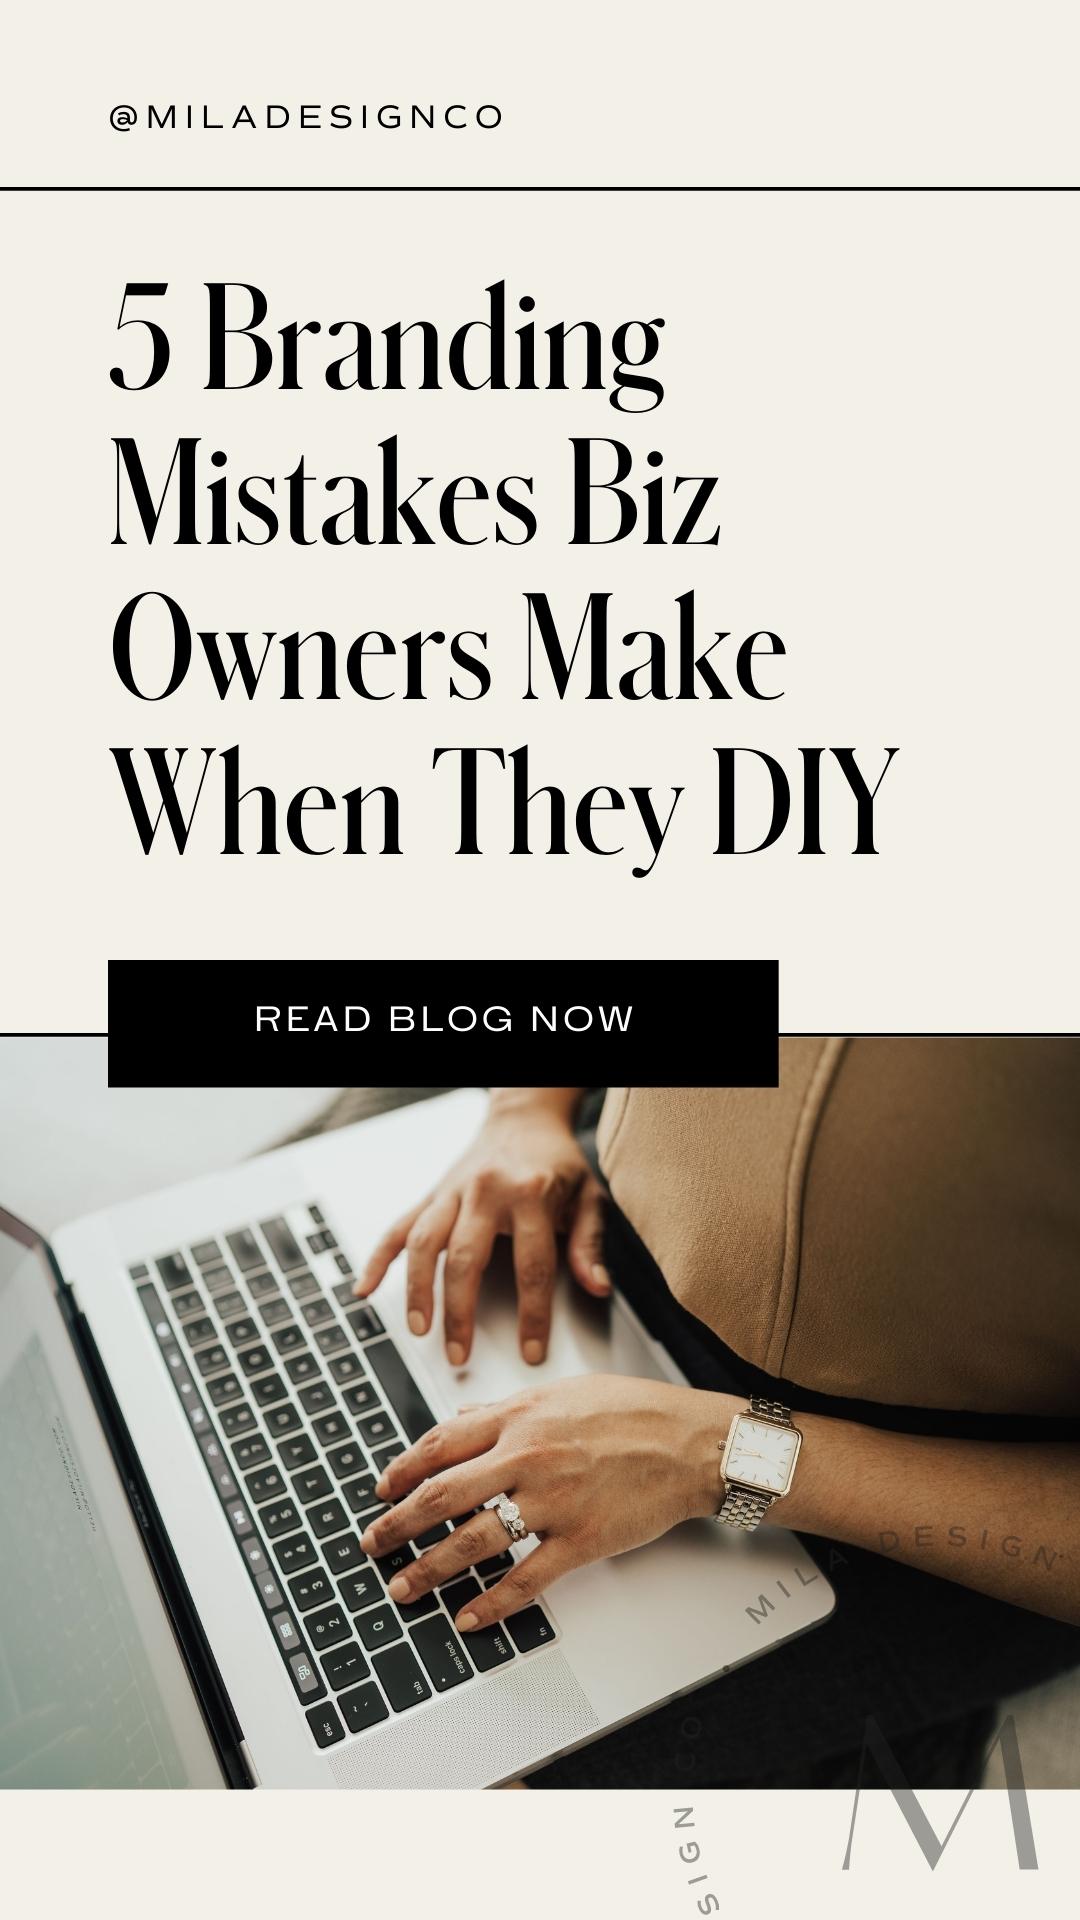 5 Branding Mistakes Business Owners Make When They DIY